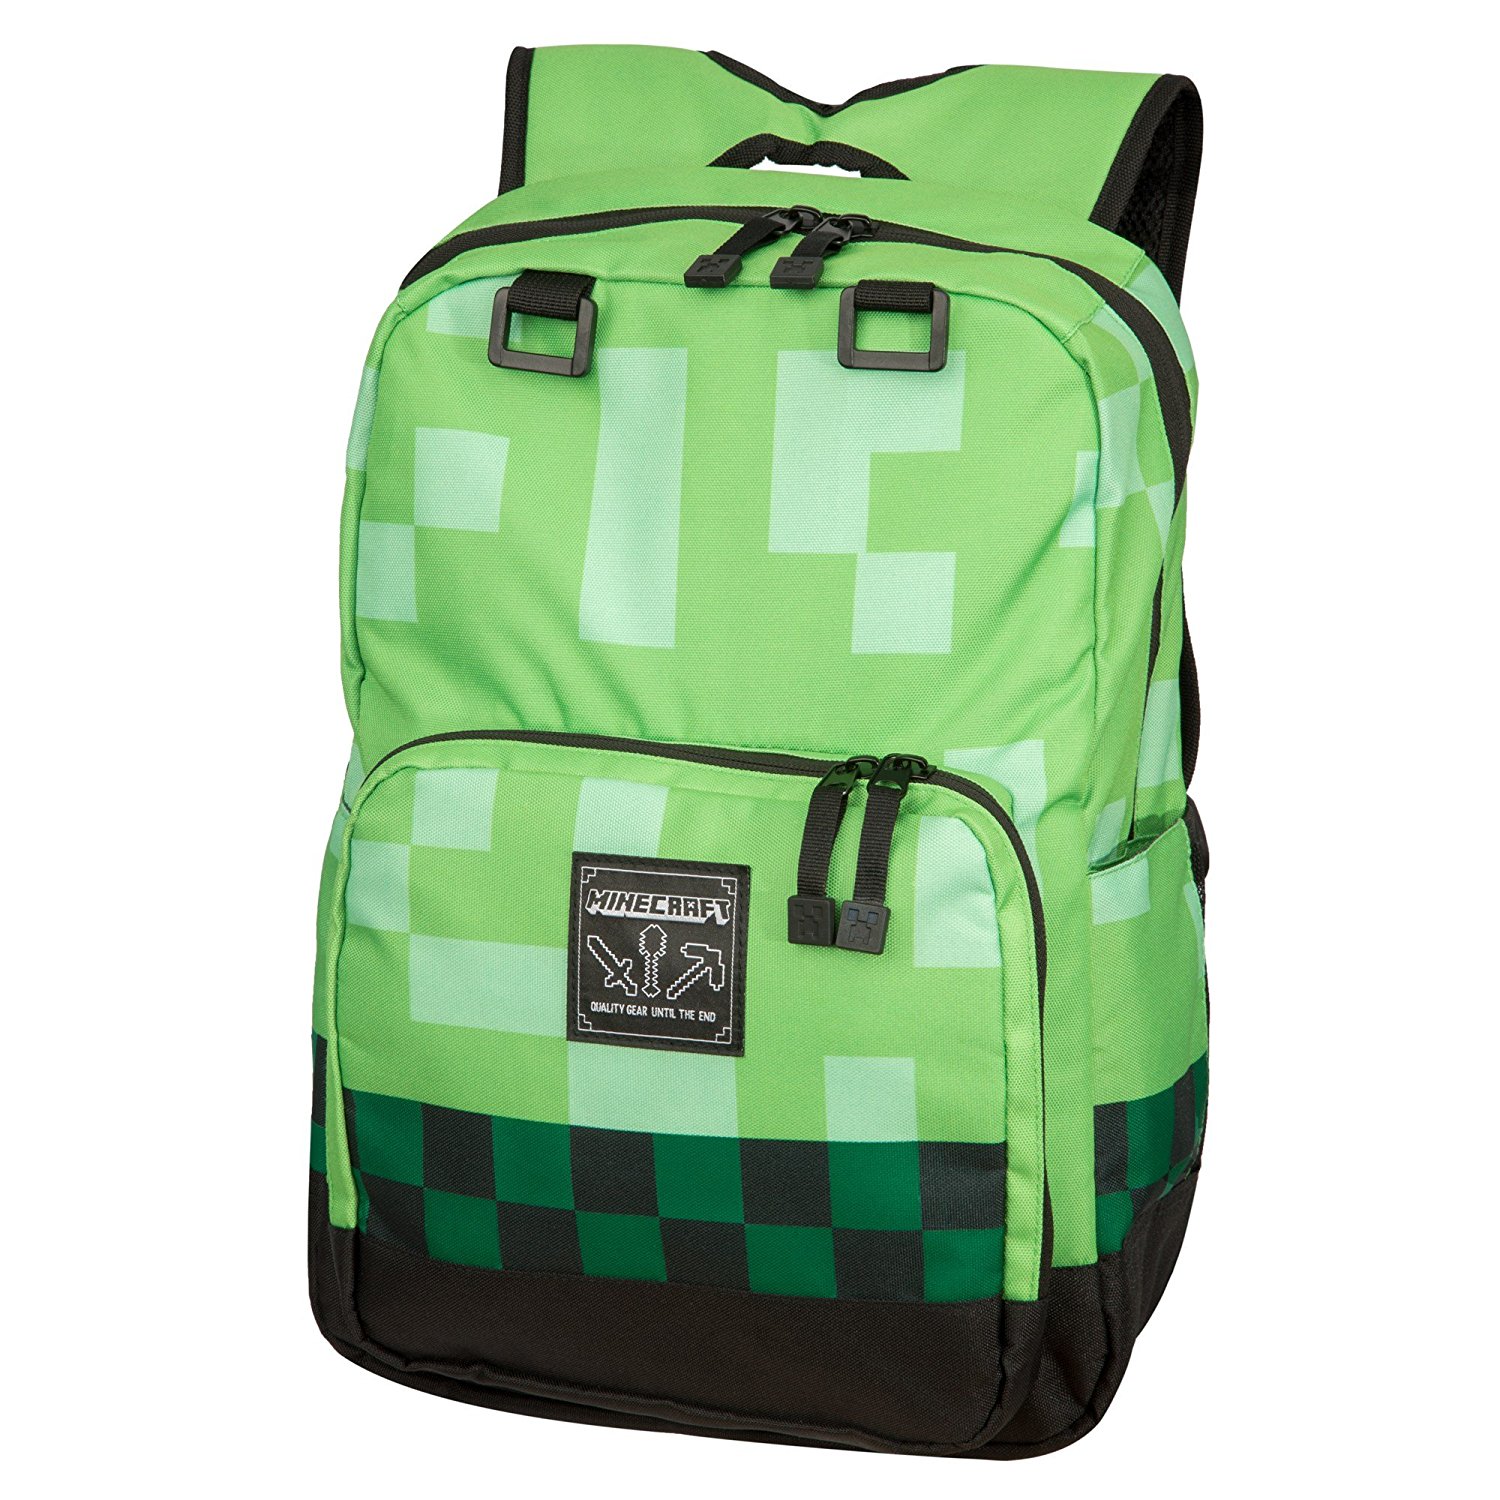 Free photo: Green Backpack - Backpack, Bag, Graphic - Free Download ...